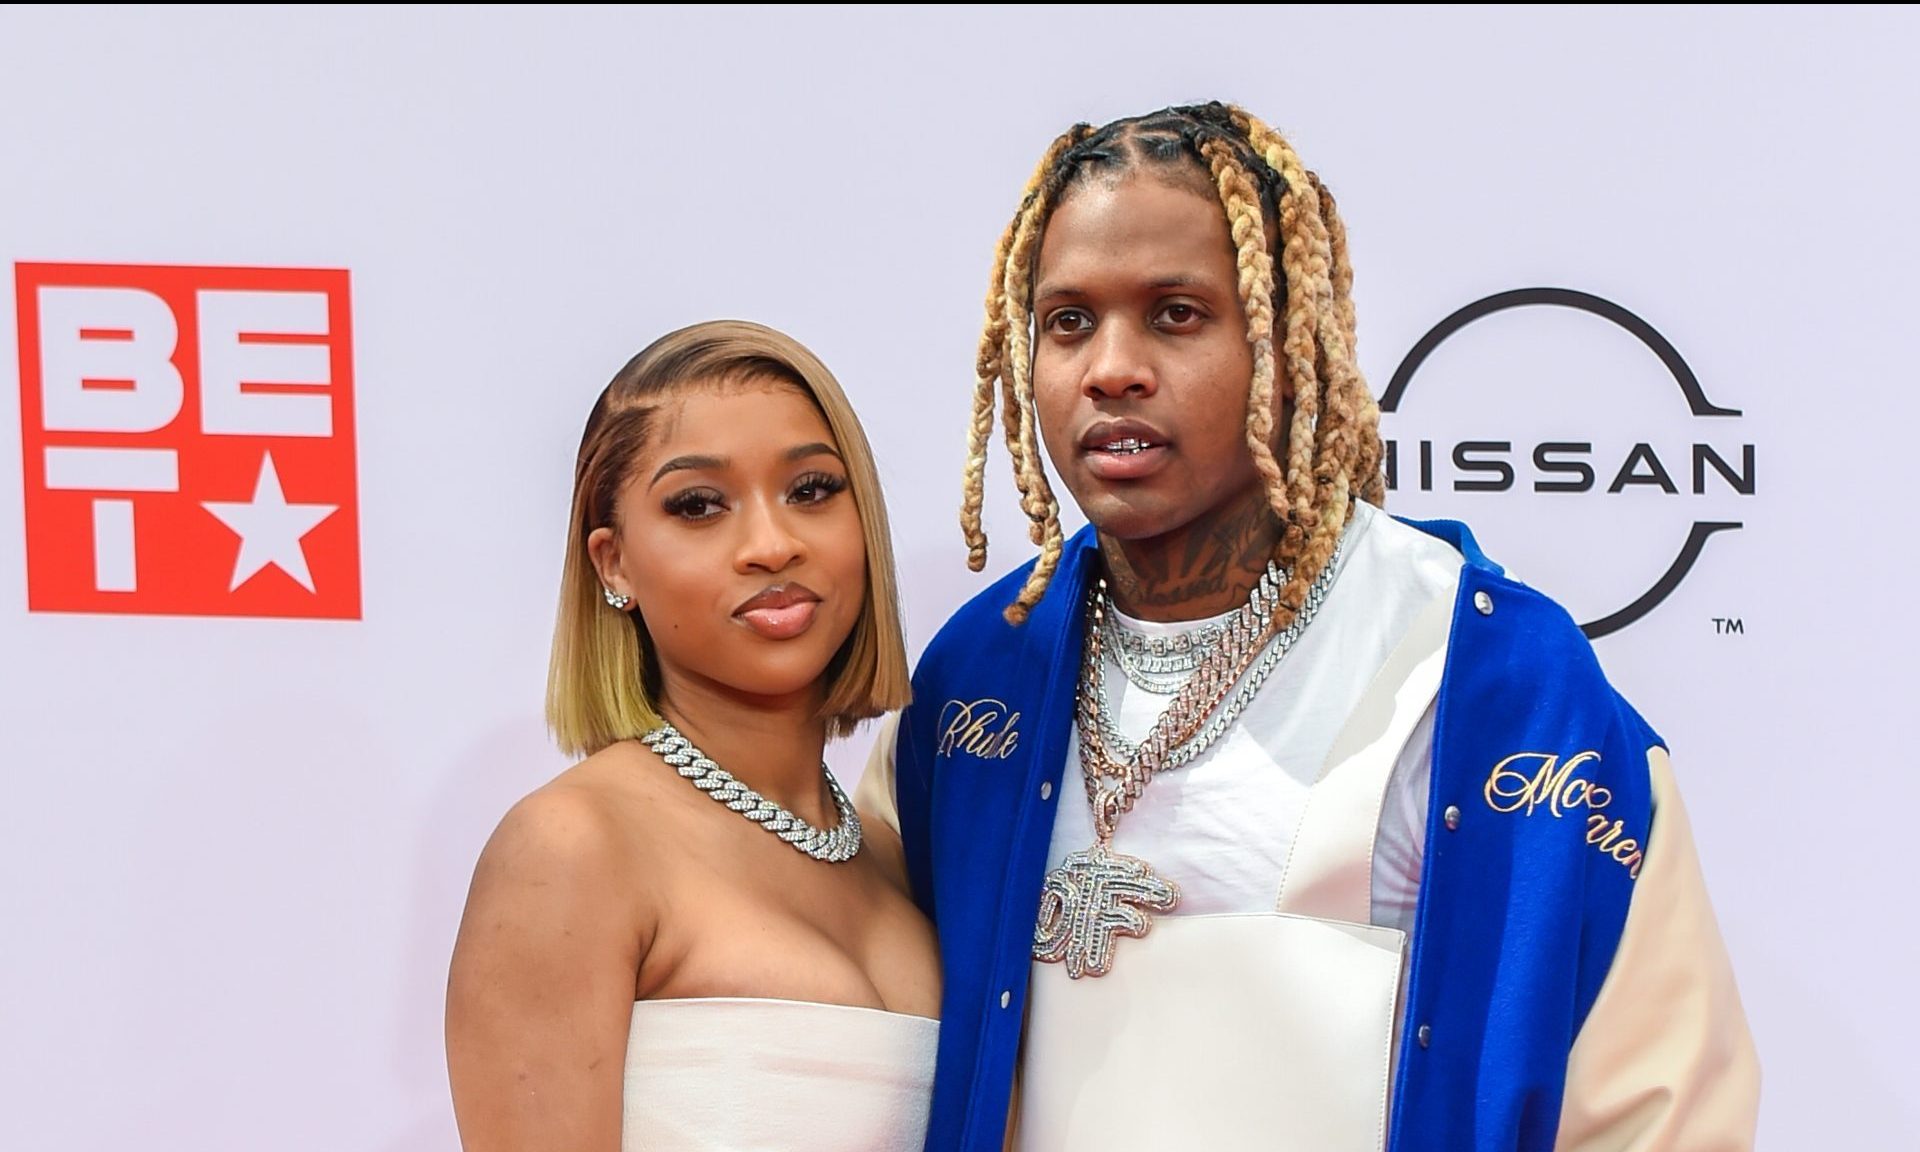 Lil Durk Responds After India Royale Tweets 'Let It Go' Following His Valentine's Day Post About Her